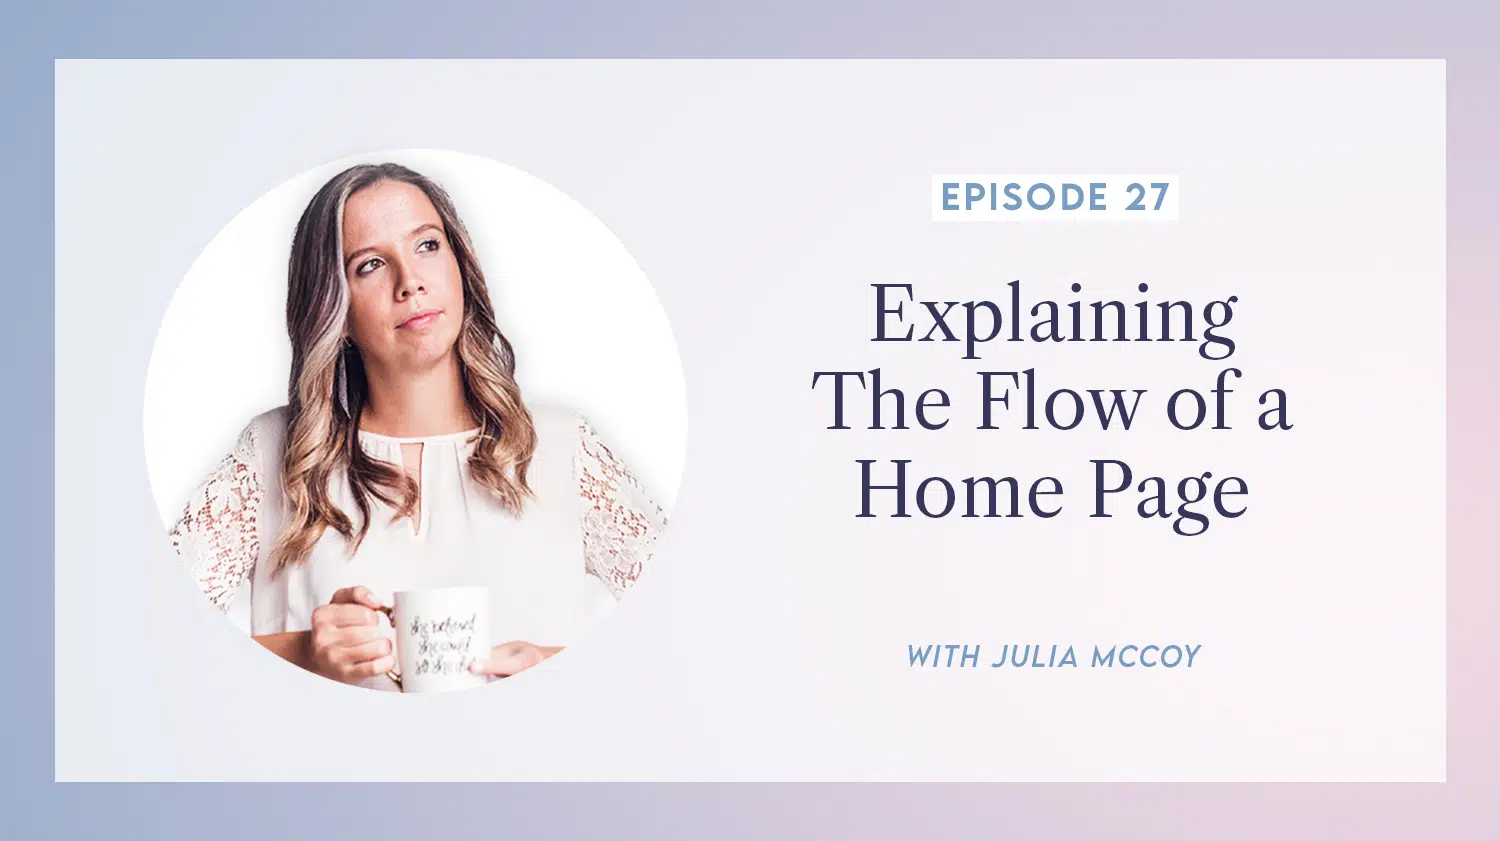 content transformation podcast with julia mccoy episode 27 explaining the flow of a home page